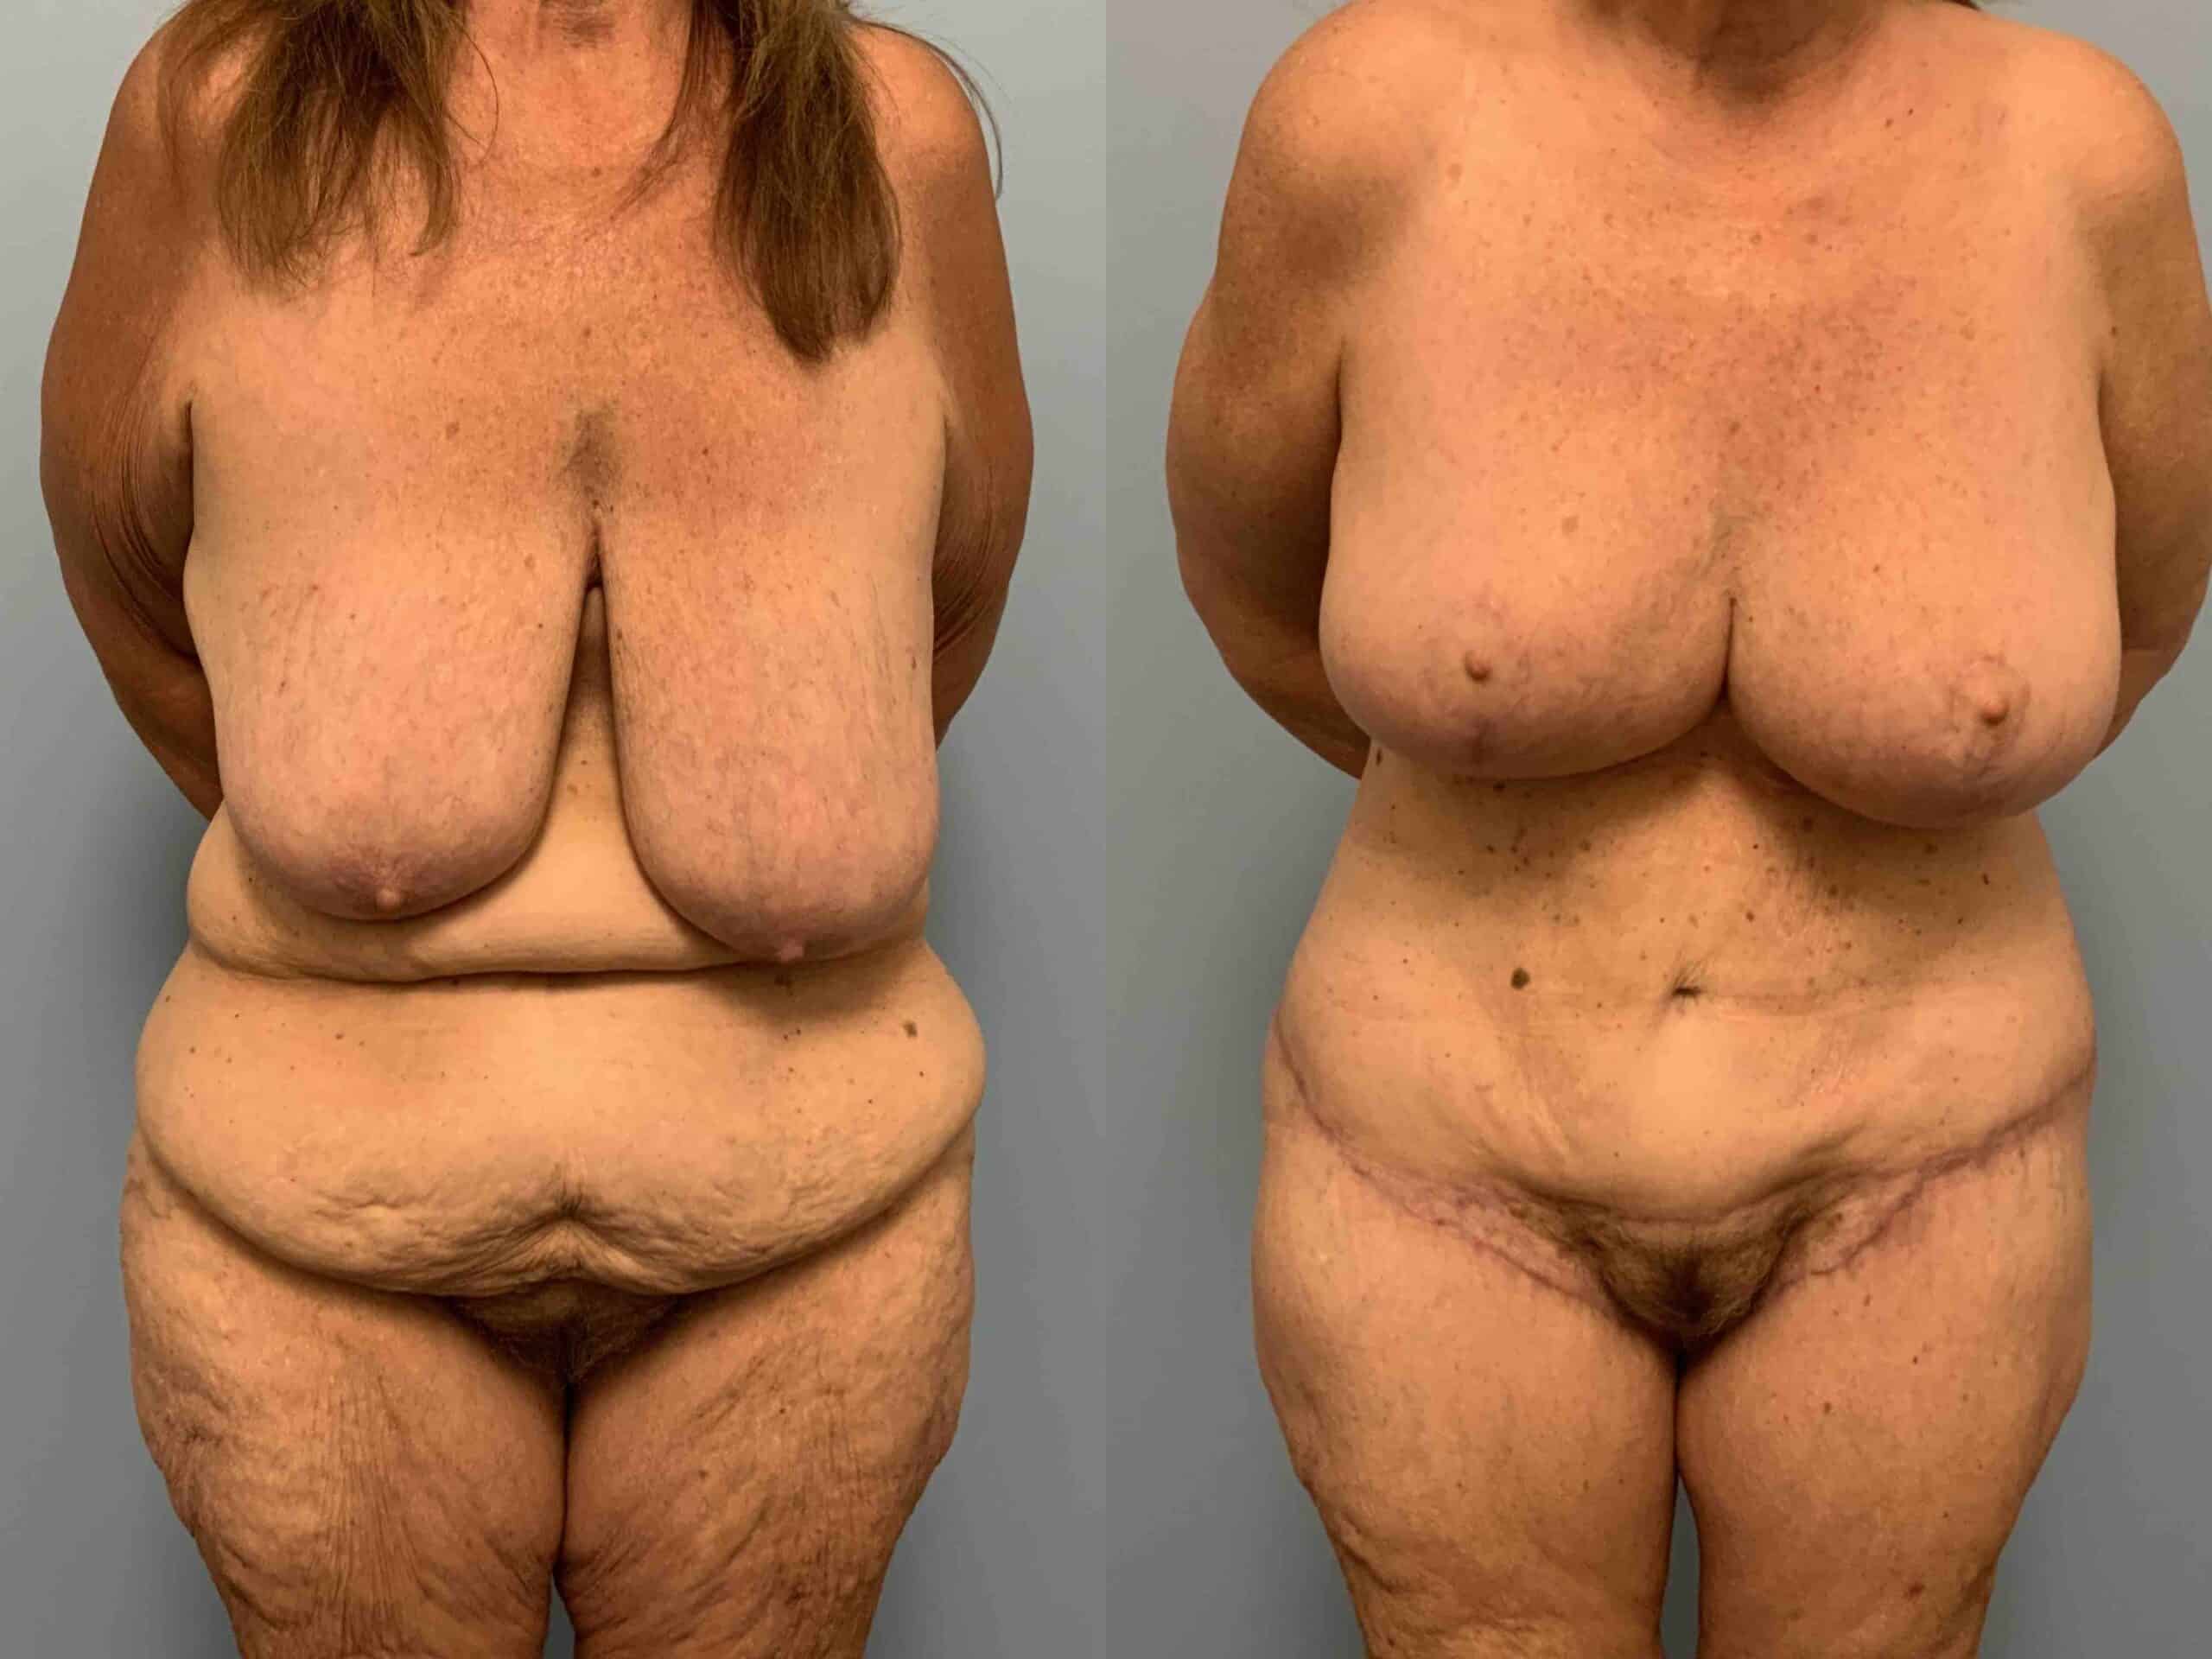 Before and after, patient 2 mo post op from VASER Abdomen, Renuvion Abdomen, Axilla & Mons, Axillary Roll Resection, Breast Reduction, Tummy Tuck procedures performed by Dr. Paul Vanek